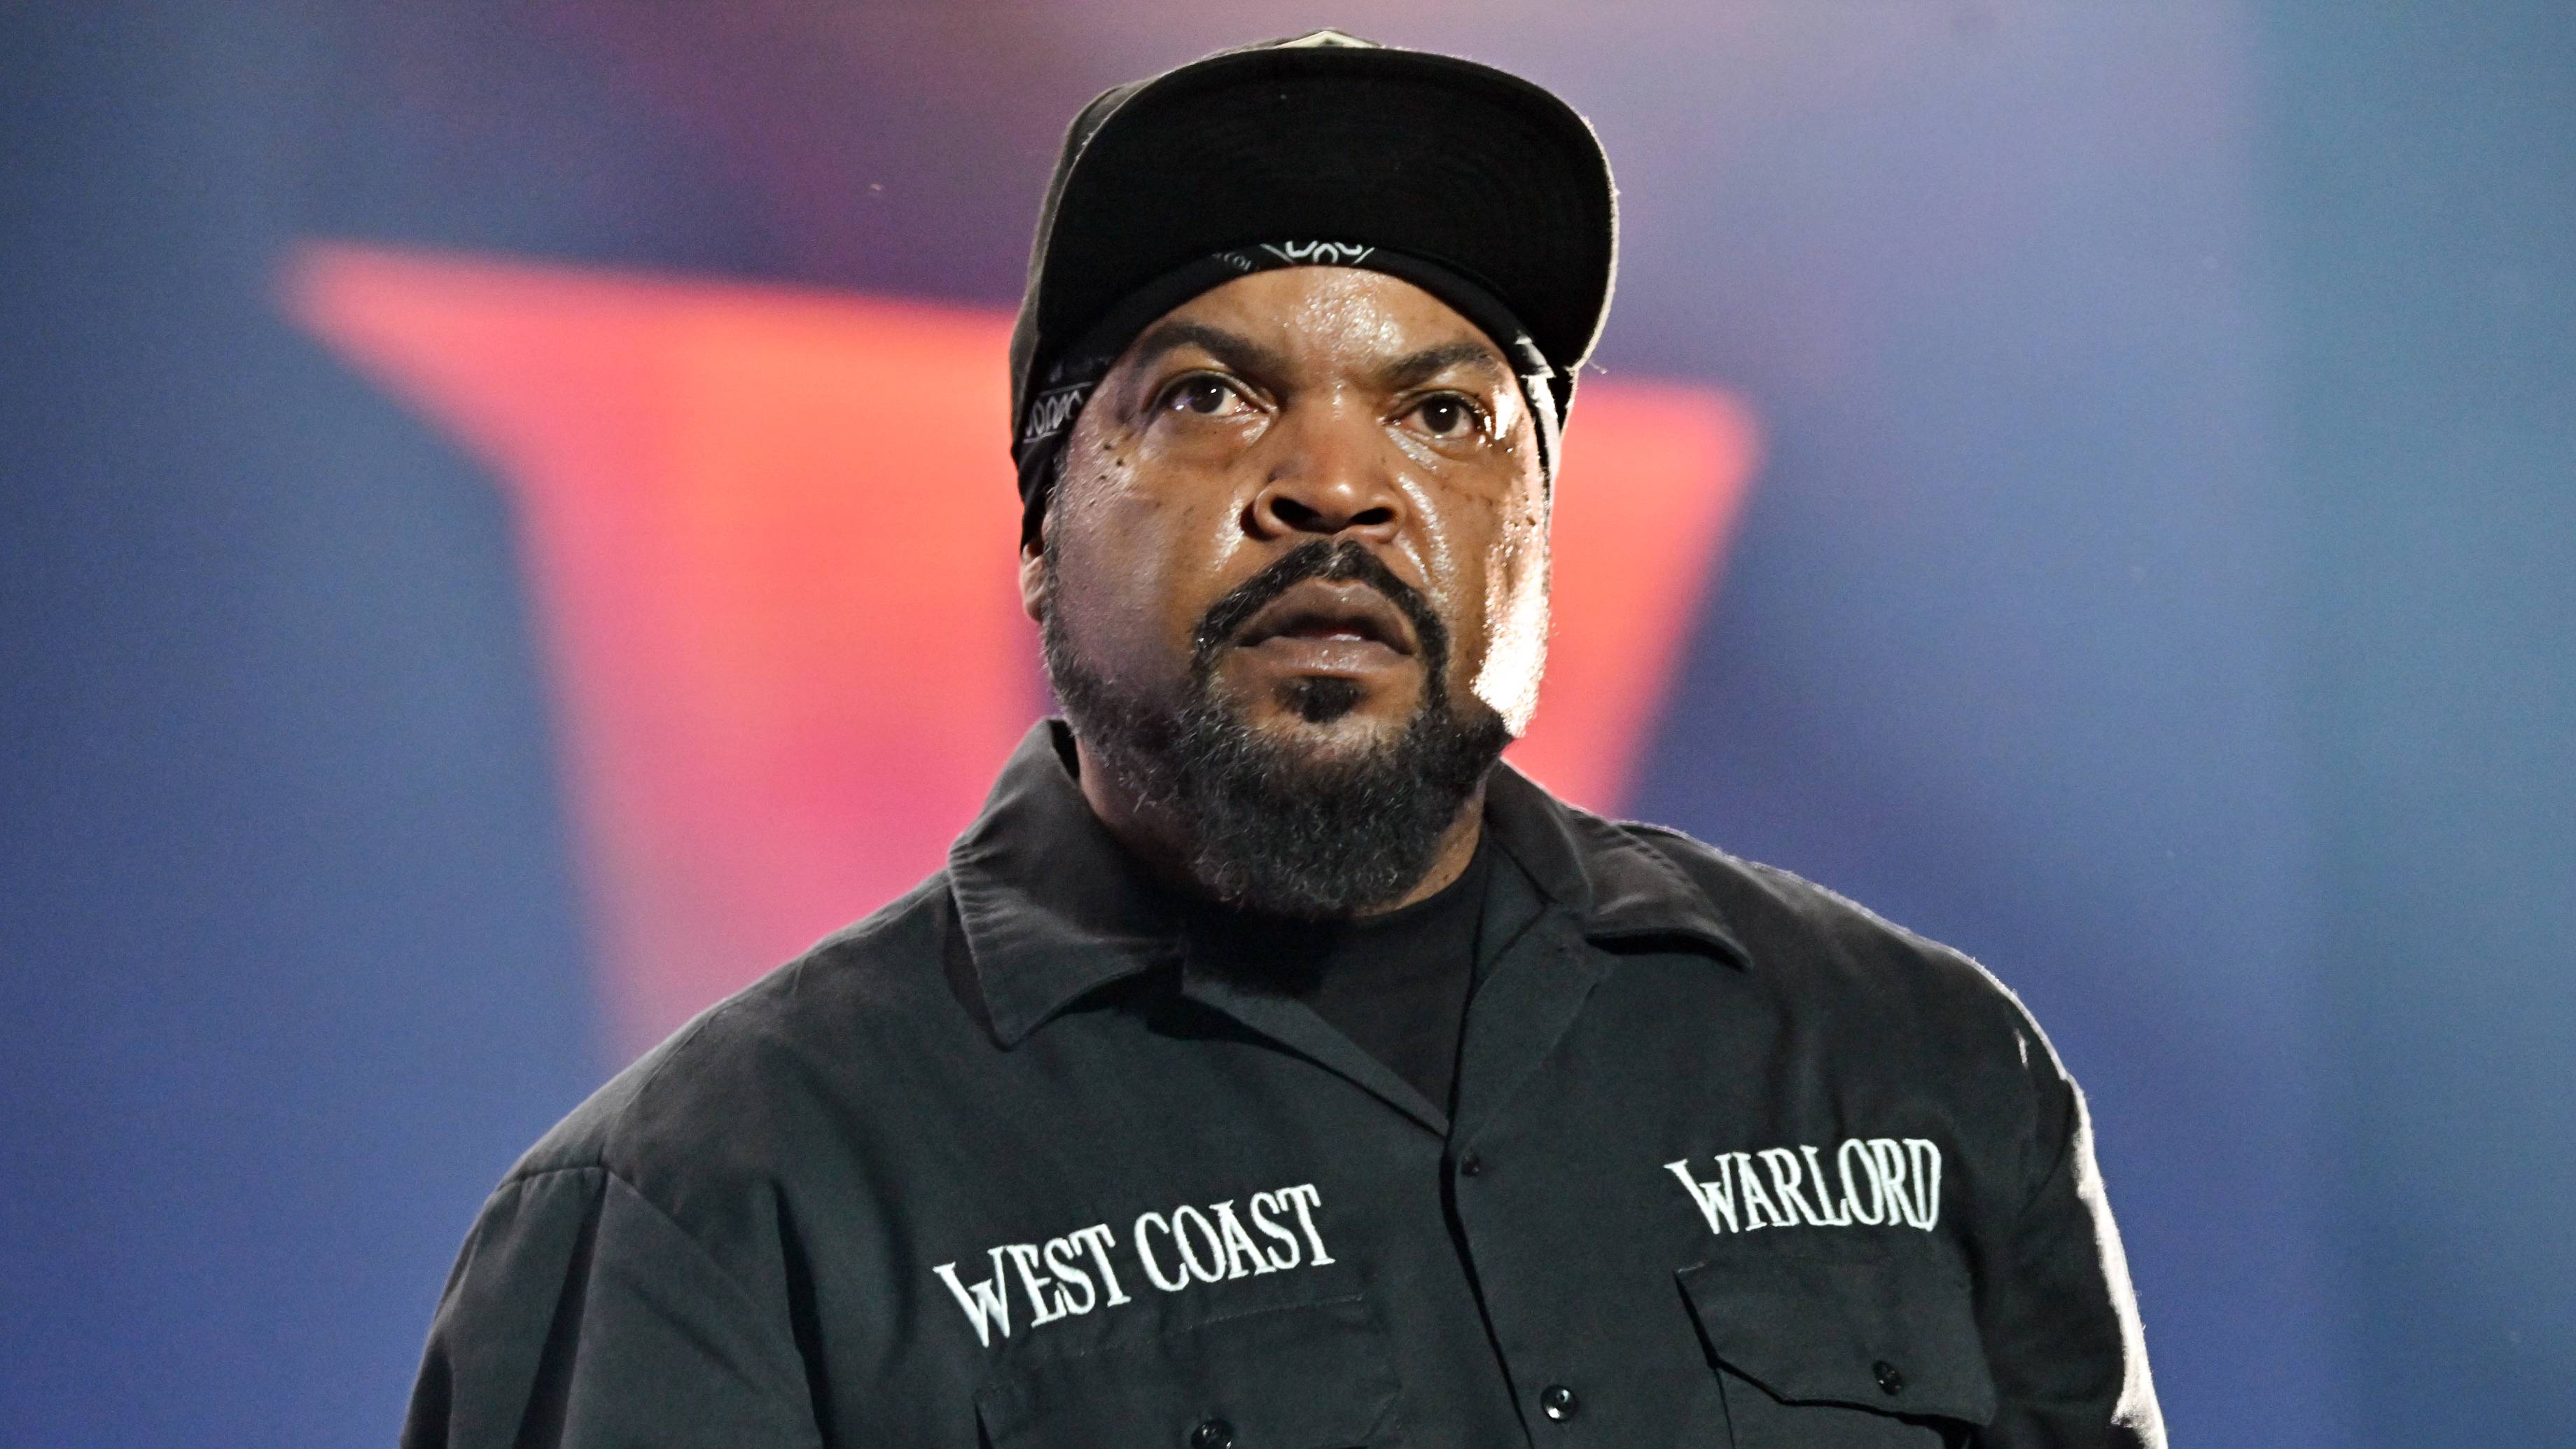 Is Rapper Ice Cube Dead or Alive? Who is Ice Cube? - News